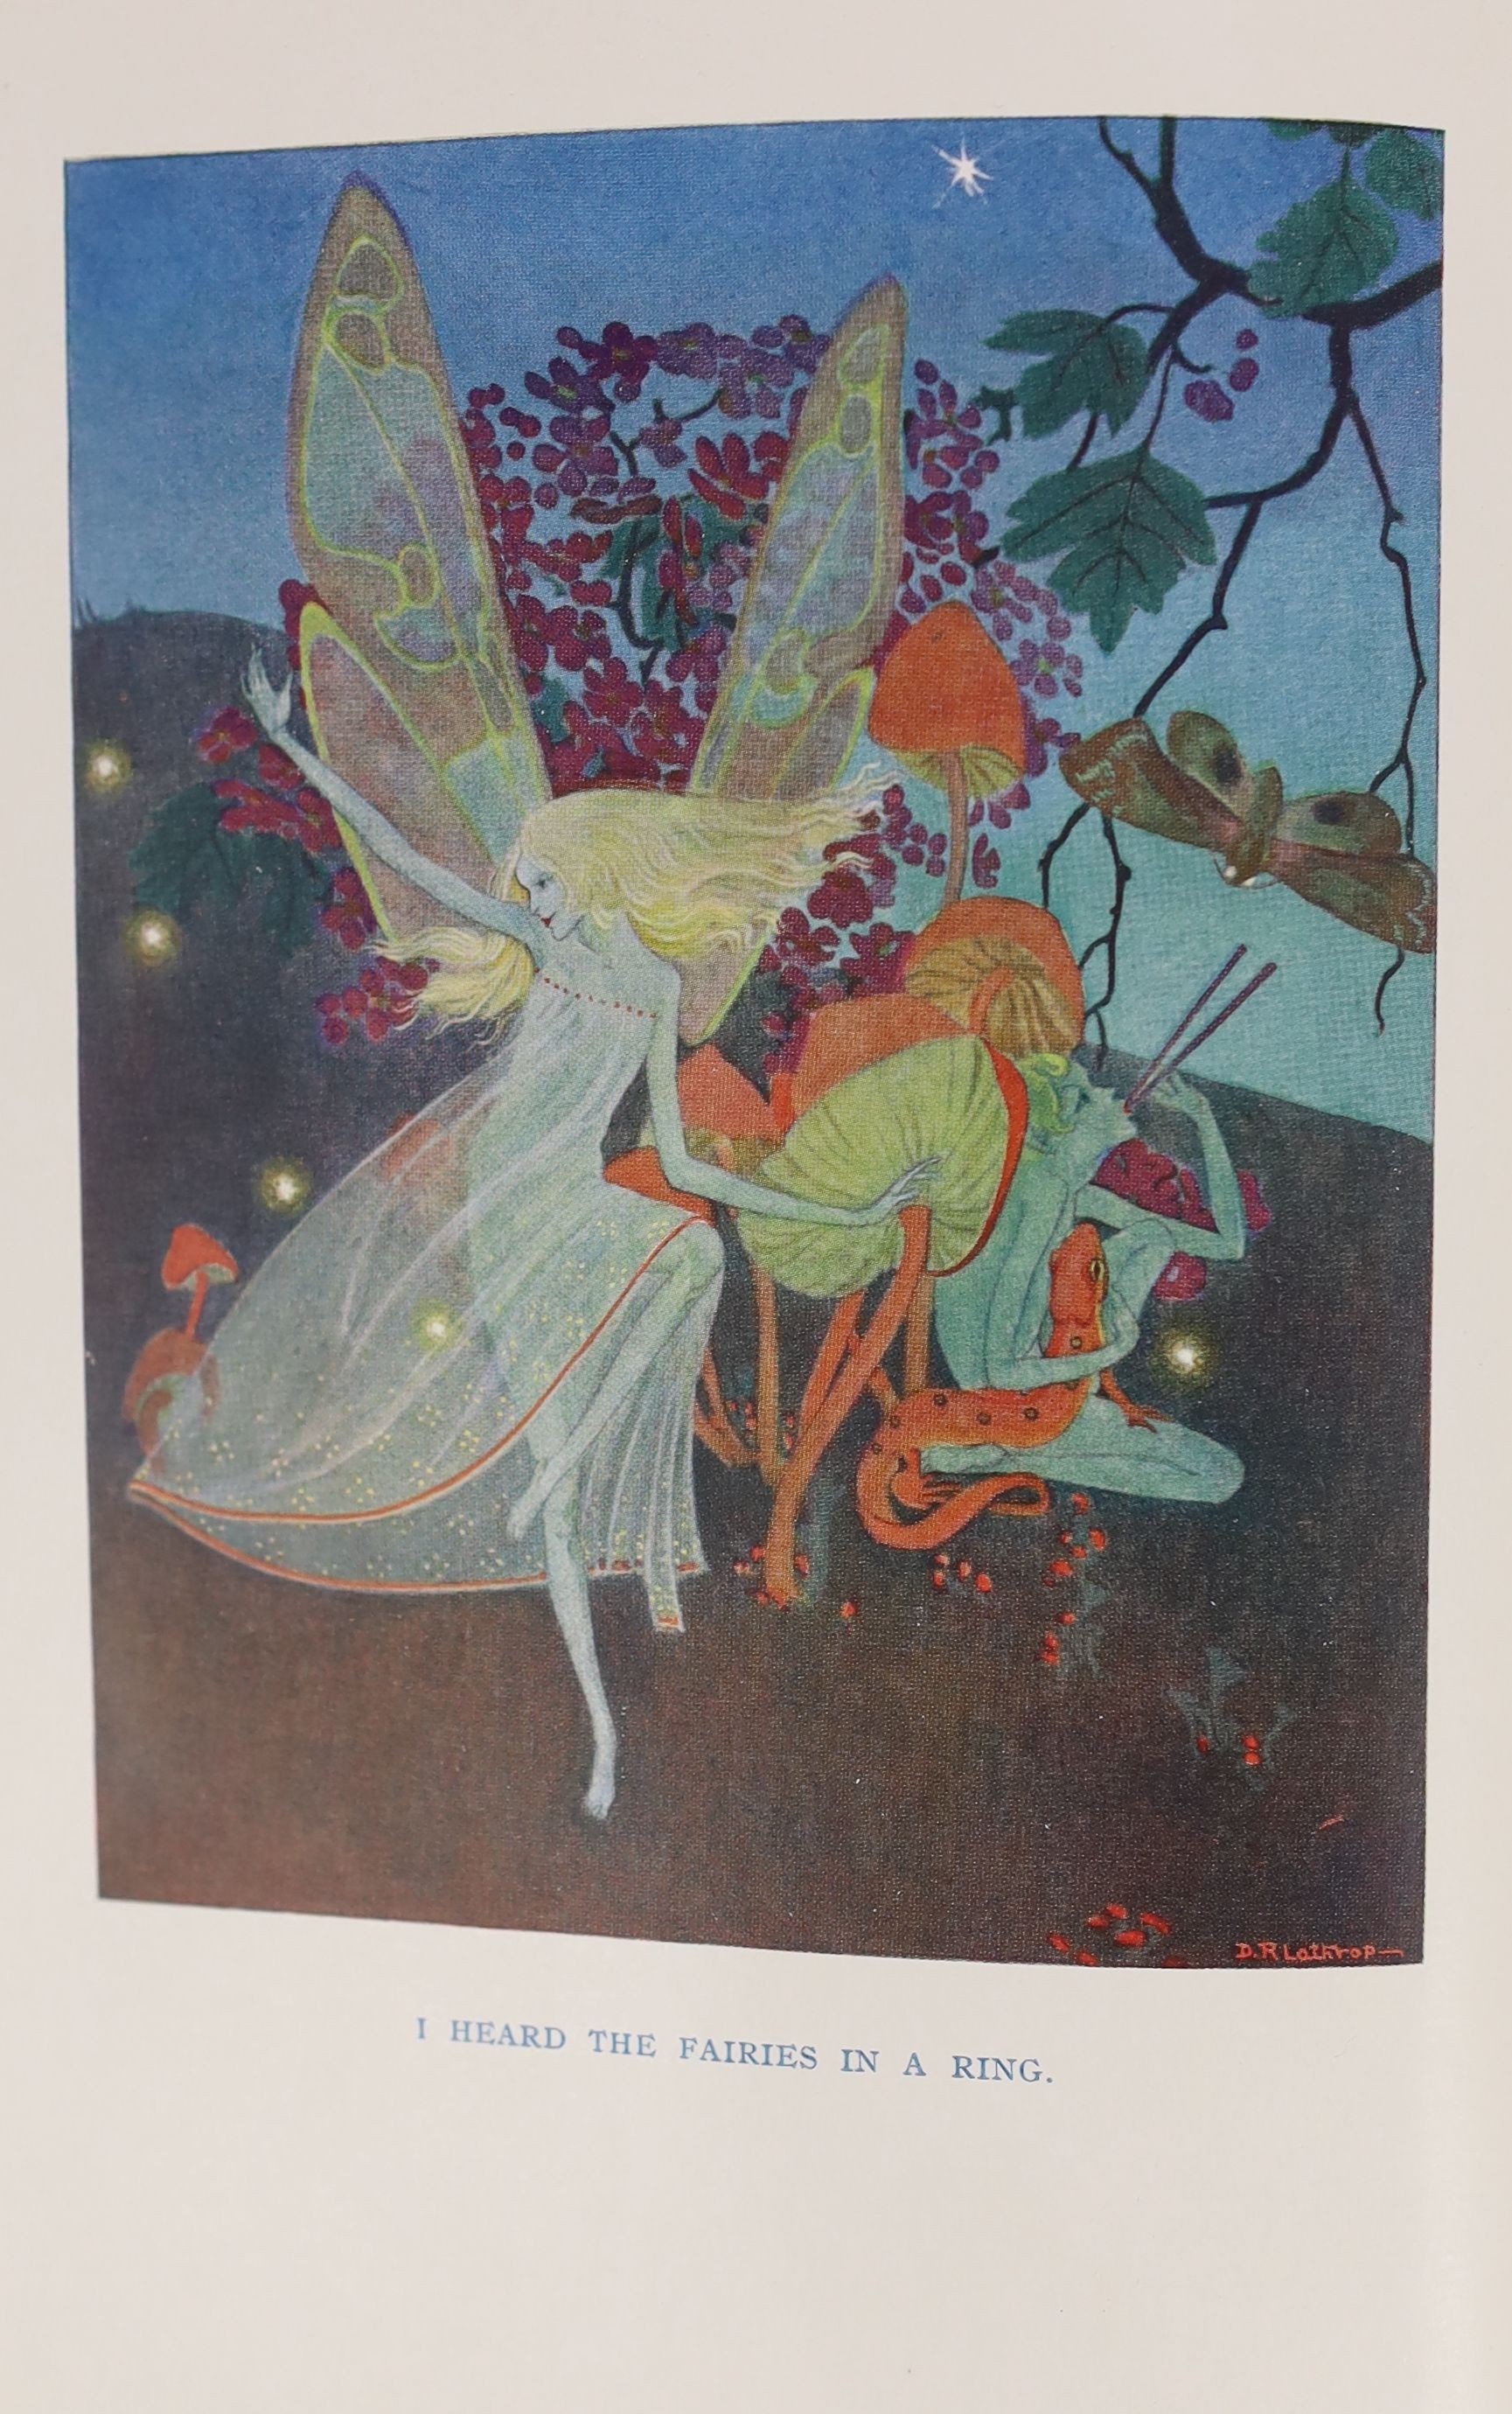 De la Mare, Walter - Down-Adown-Derry, one of 325, signed by the author, illustrated by Dorothy Lathrop, 4to, original vellum gilt, with 3 coloured plates, London, 1922